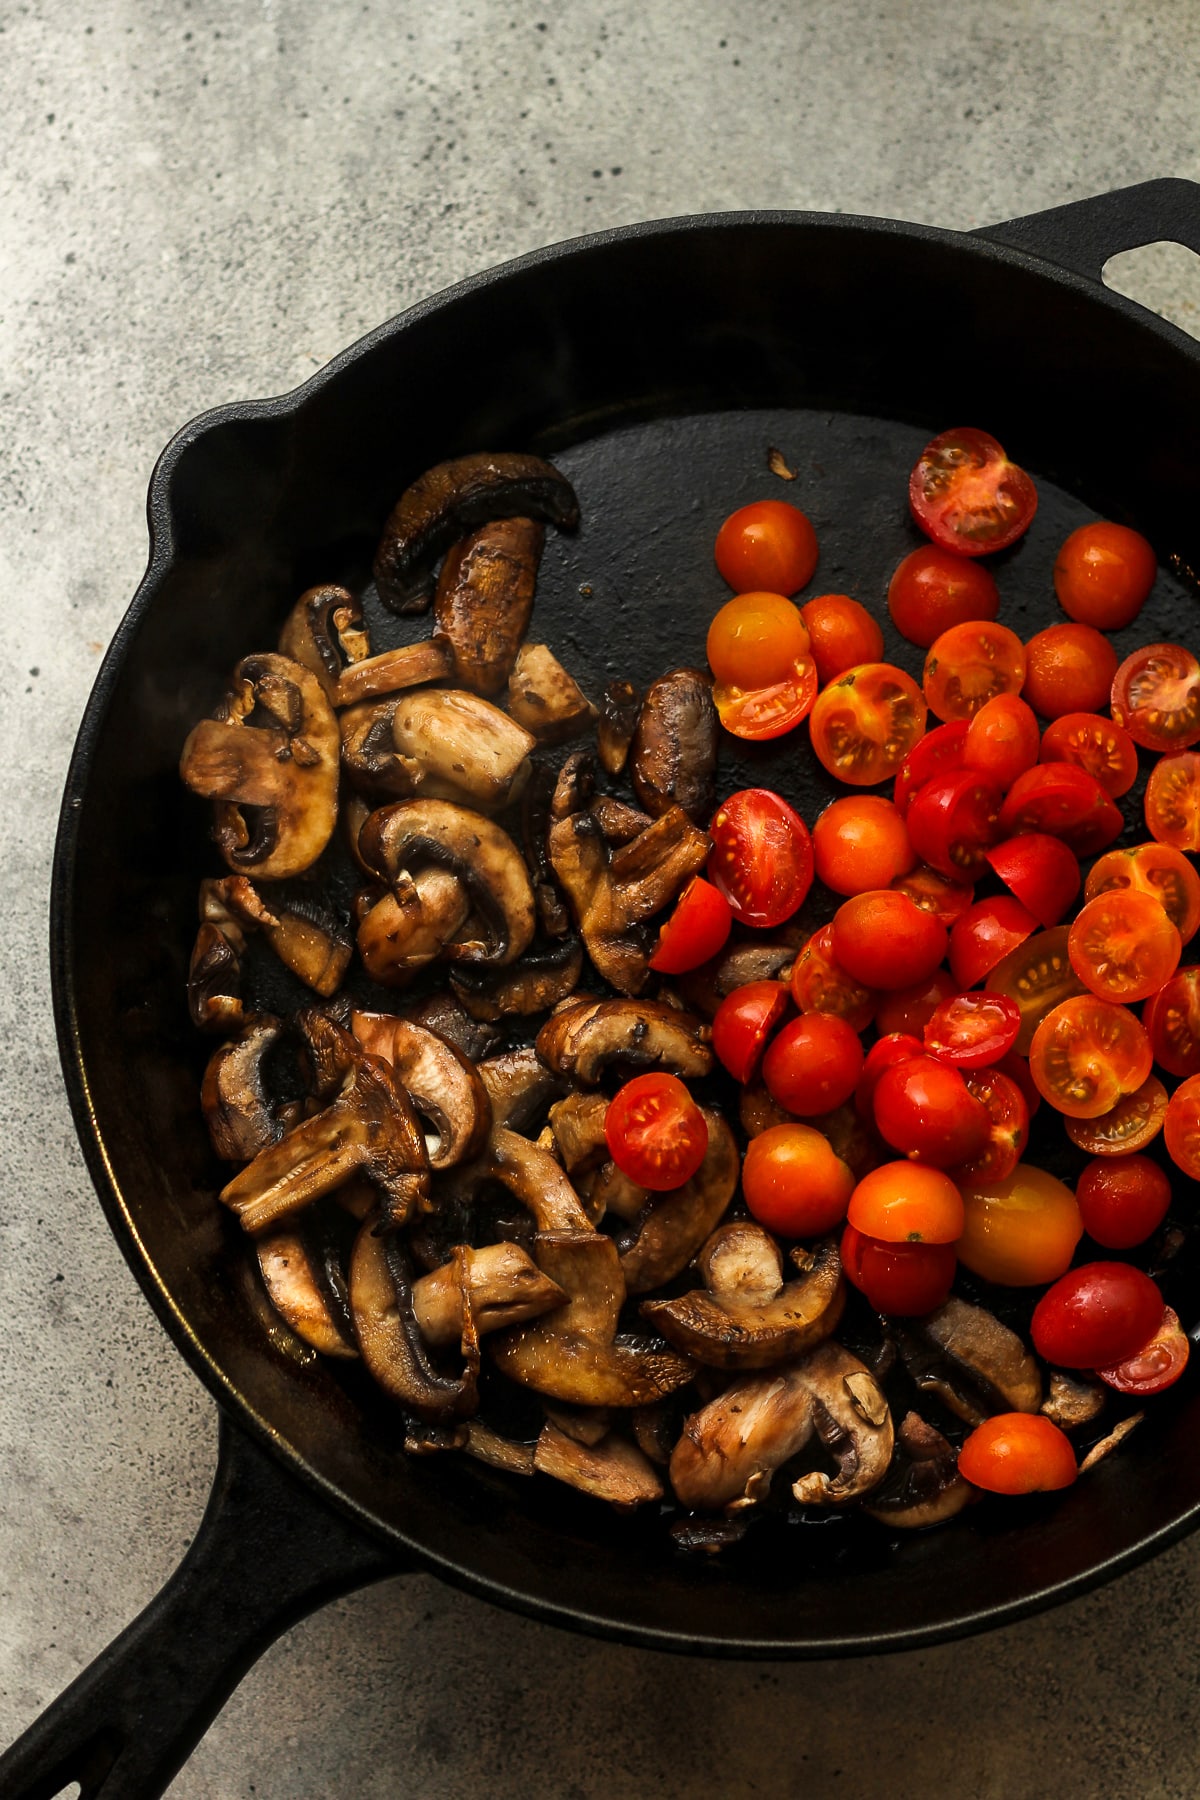 A skillet of the mushrooms and tomatoes.